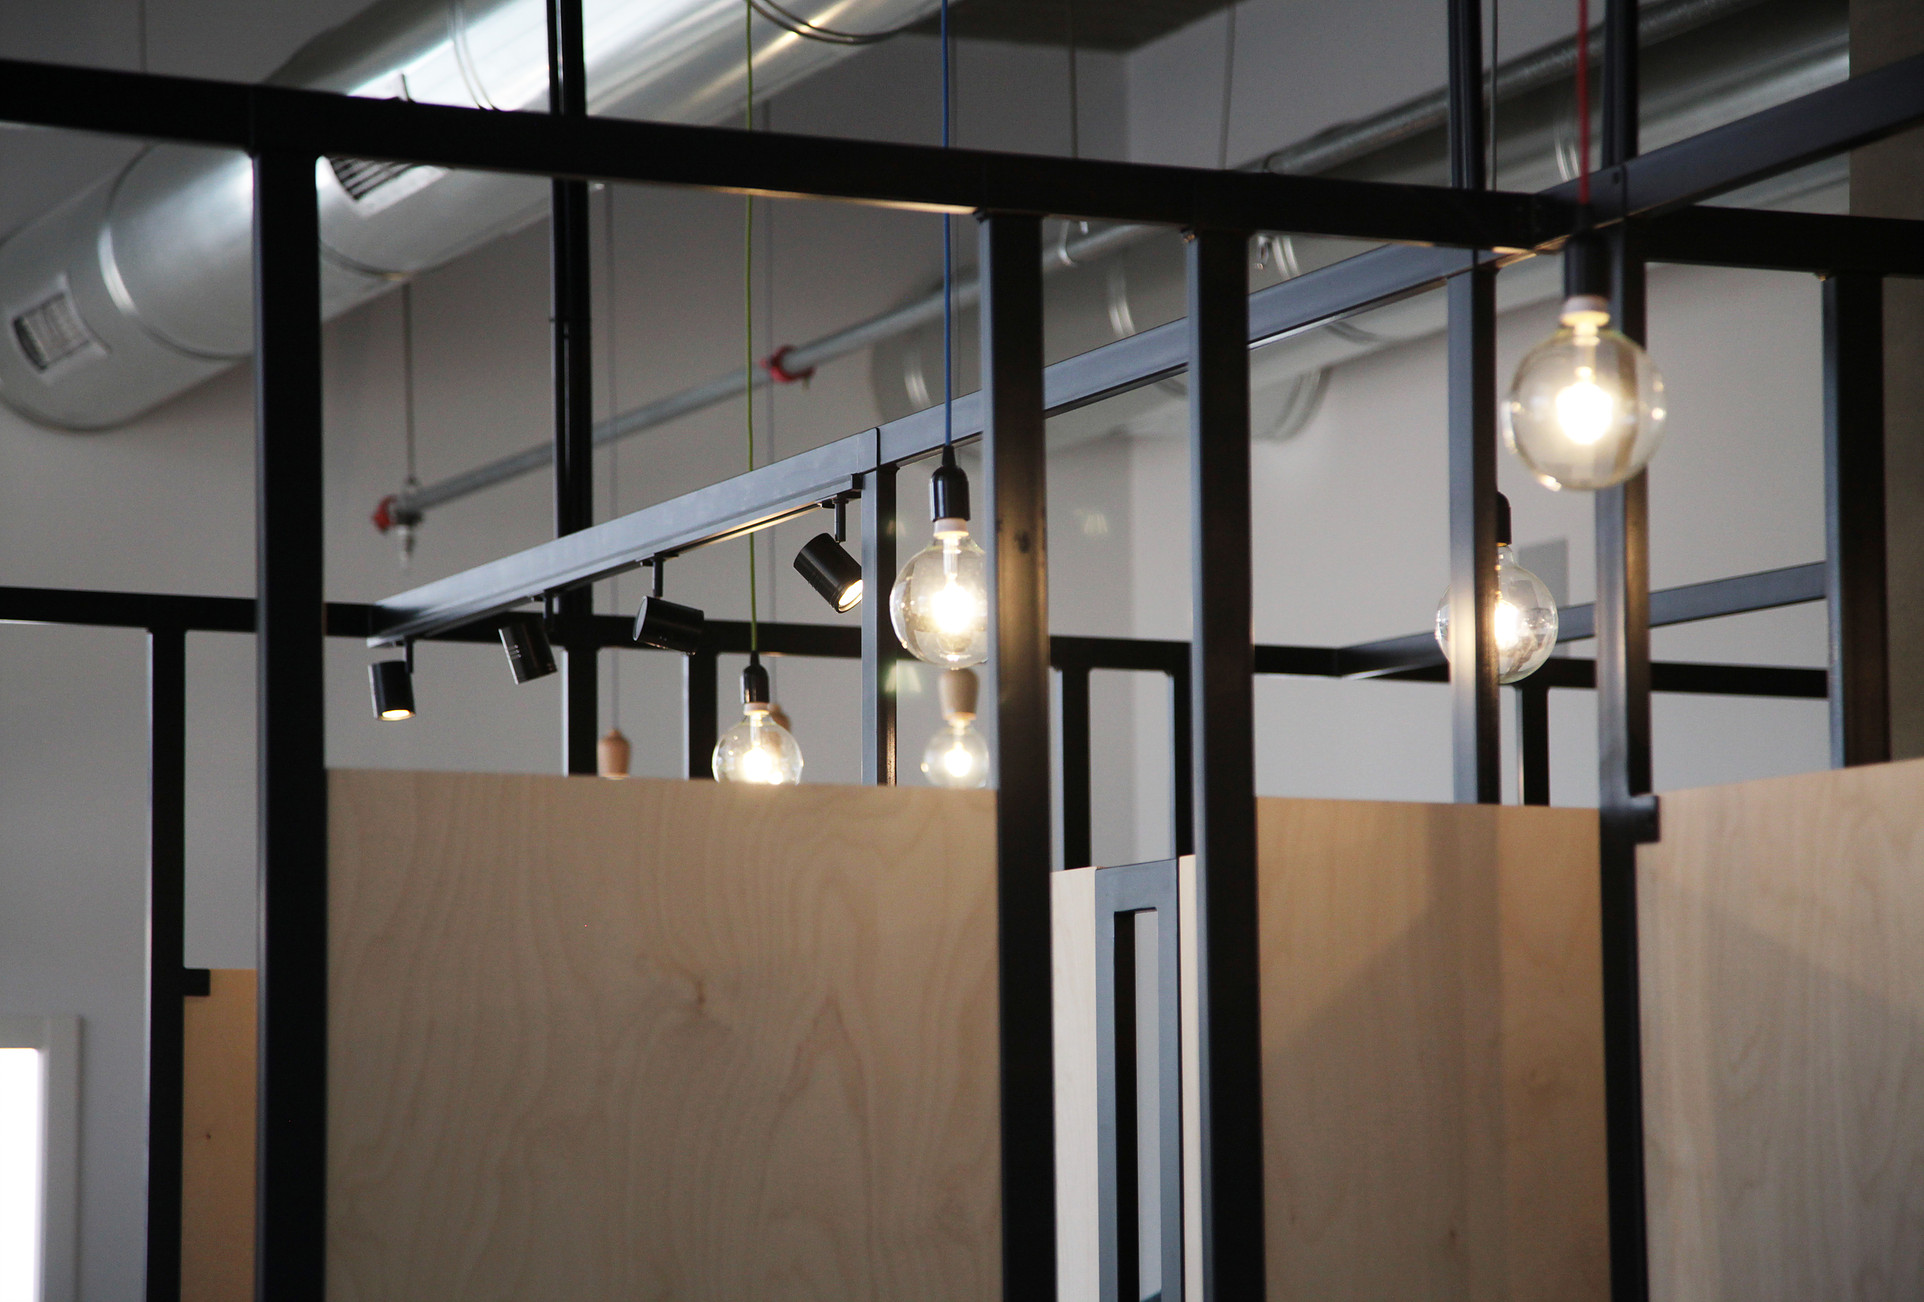 steel construction of wood dividers combined with lighting